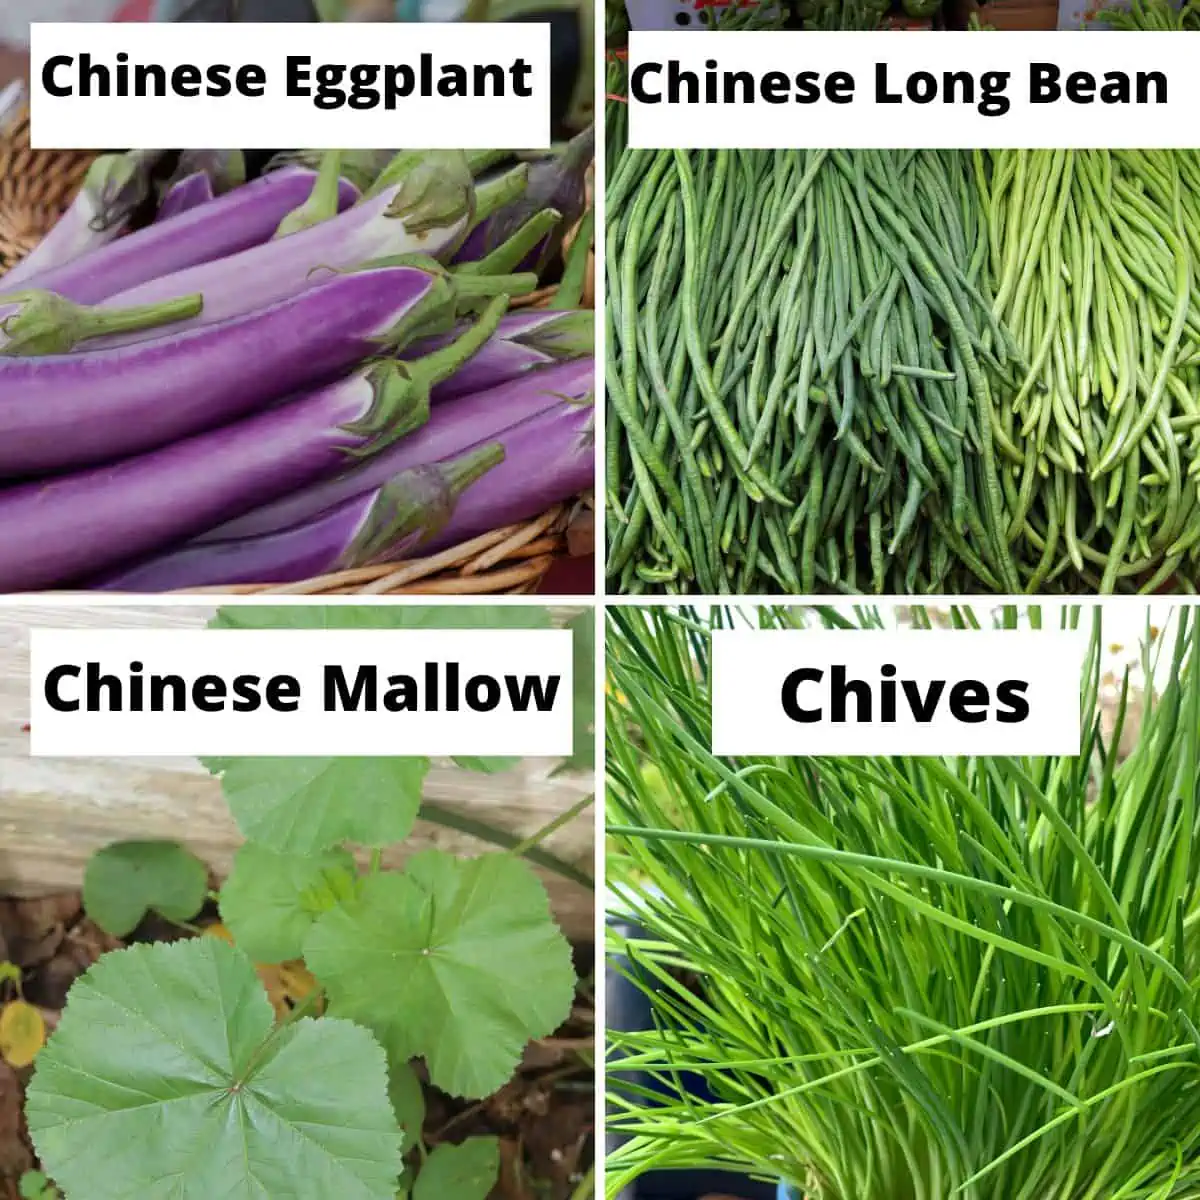 Chinese eggplant, Chinese long bean, Chinese mallow, chives. 